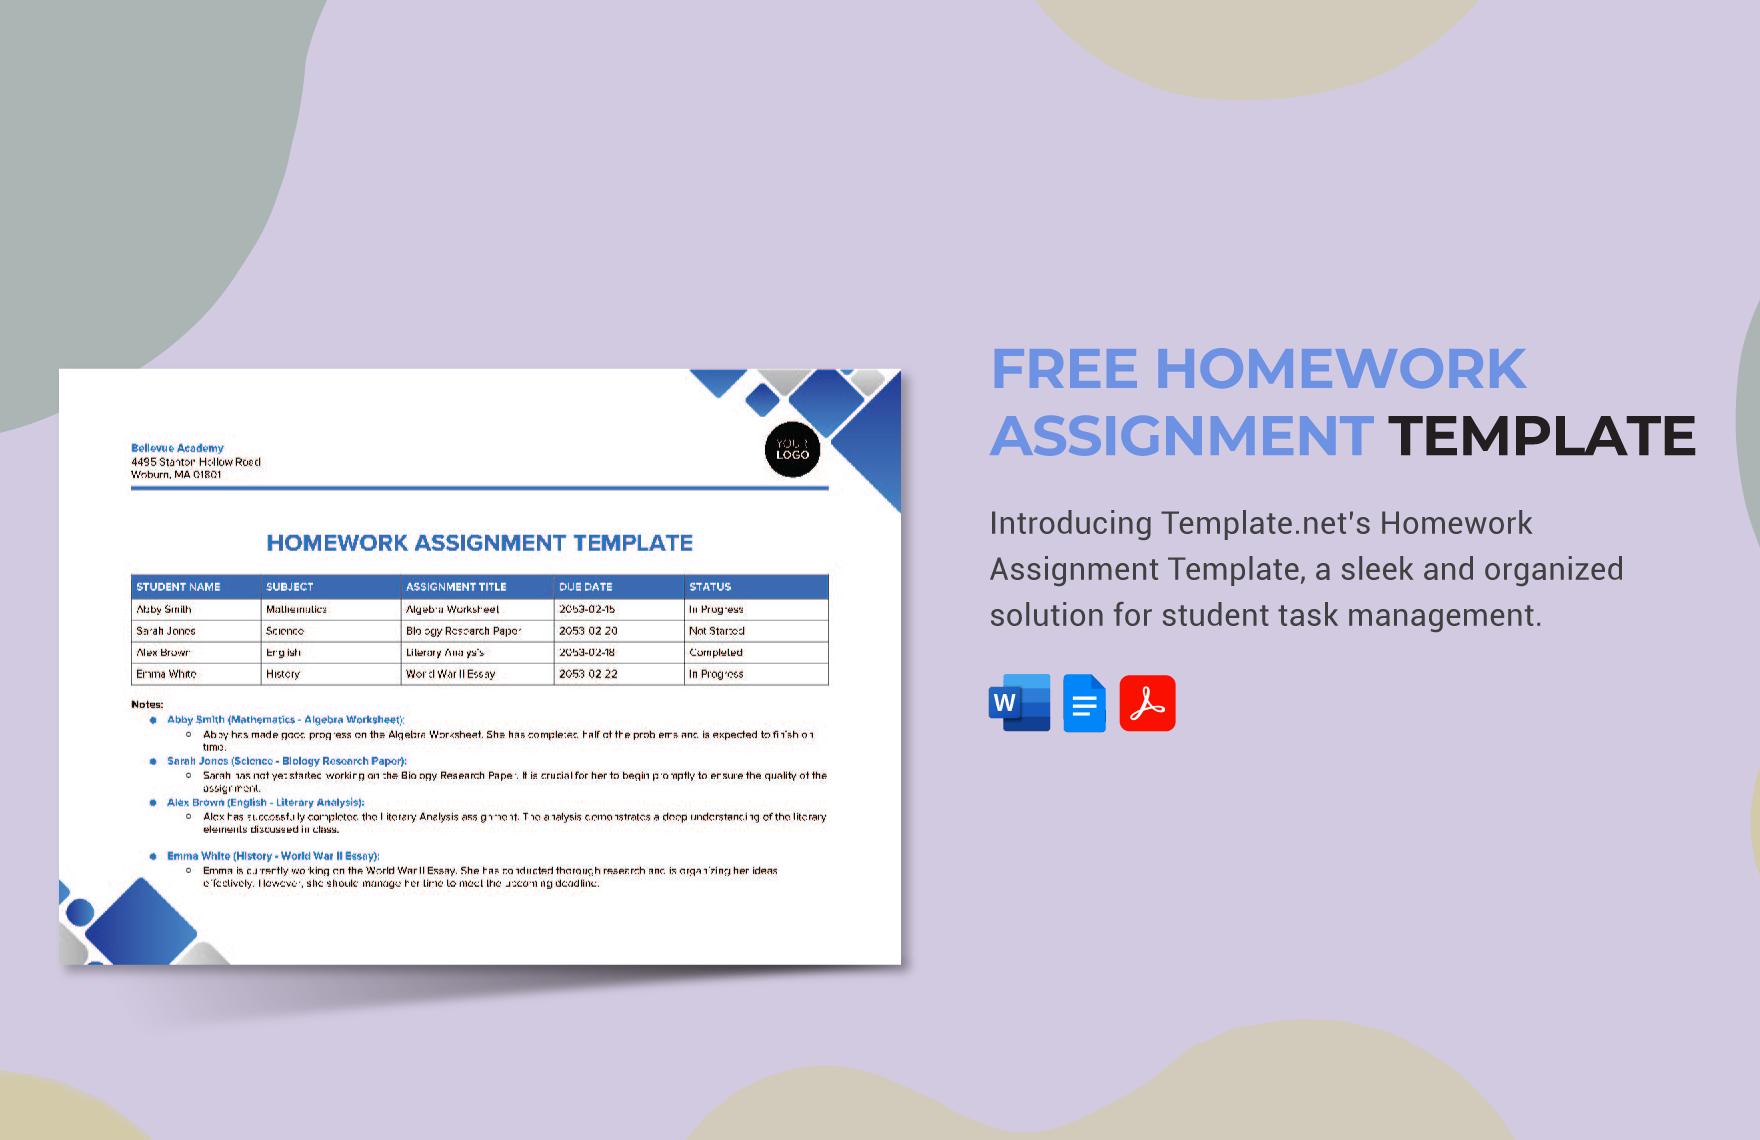 Free Homework Assignment Template in Word, Google Docs, PDF